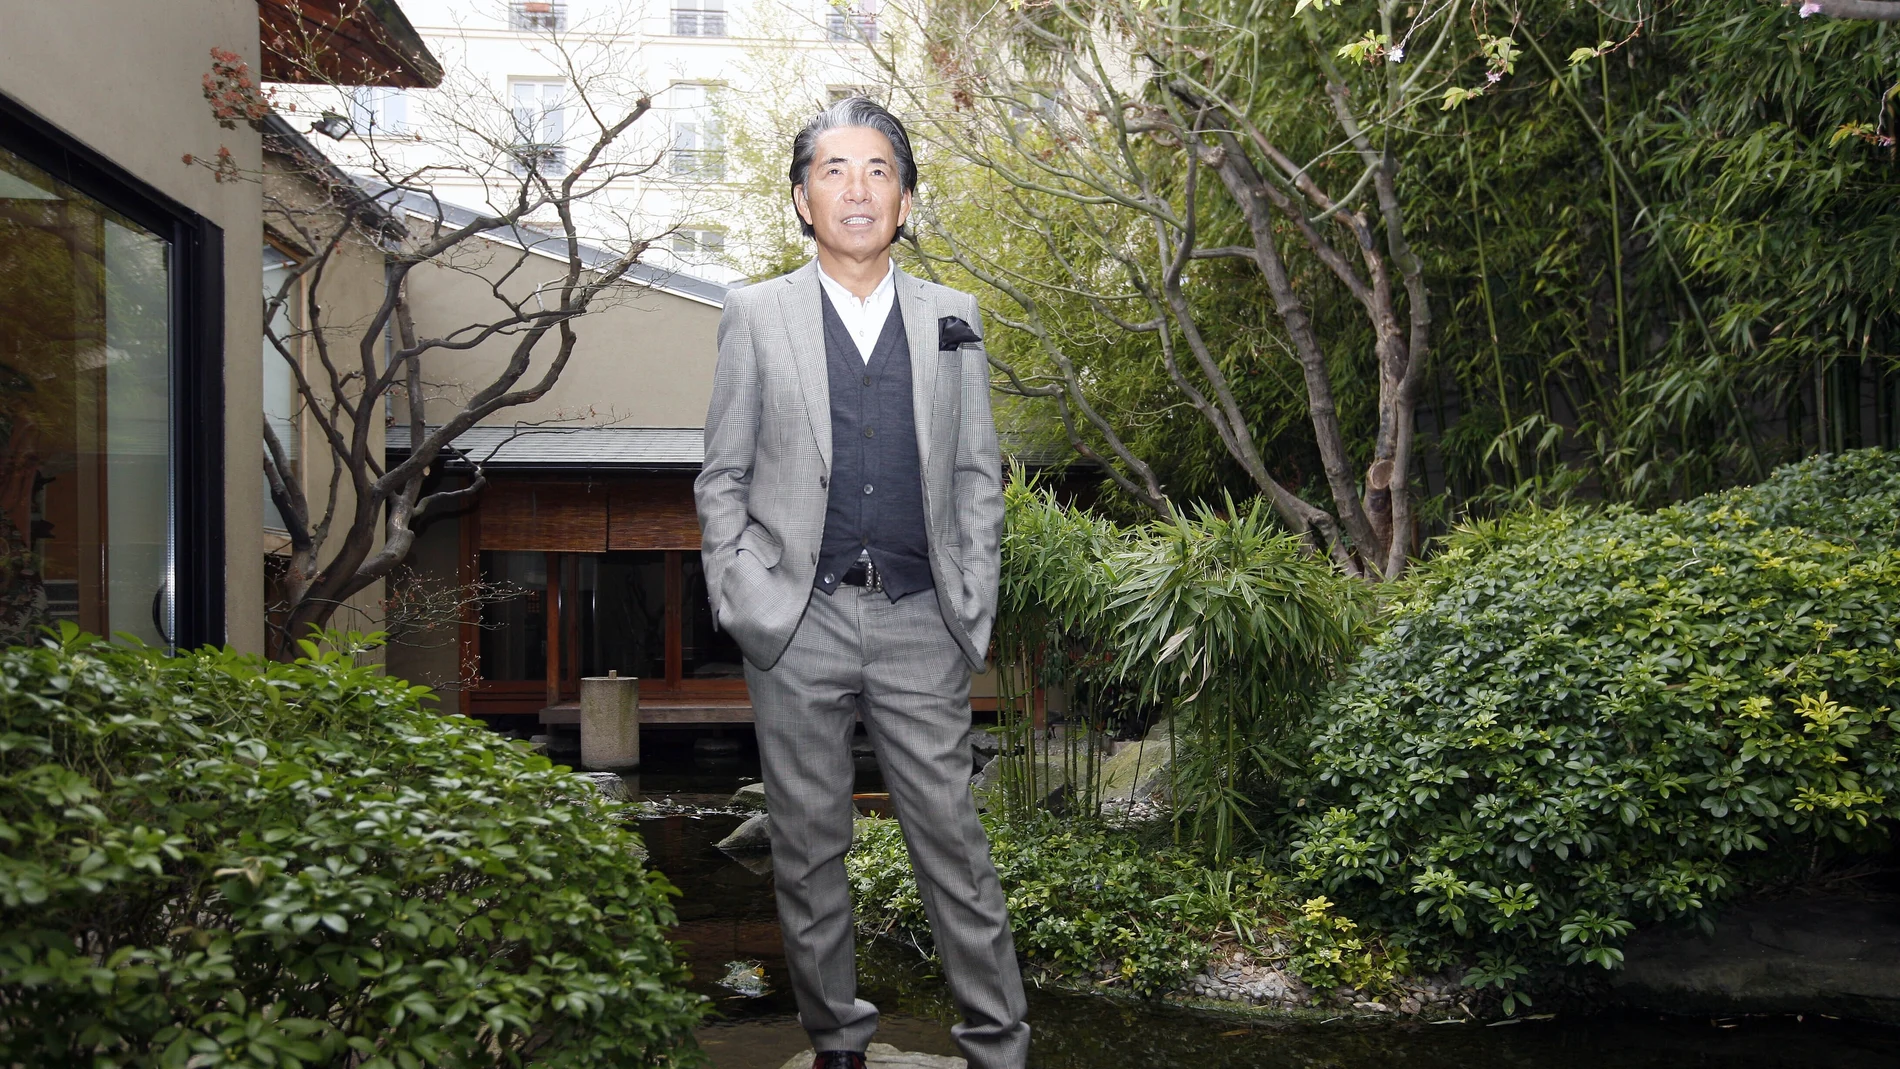 FILE - In this Tuesday, March 24, 2009 file photo, Japanese fashion designer Kenzo Takada poses outside his Paris house. Fashion designer Kenzo Takada dies from COVID-19 complications at age 81 near Paris, spokeswoman and reports said Sunday Oct. 4, 2020. (AP Photo/Jacques Brinon, file)